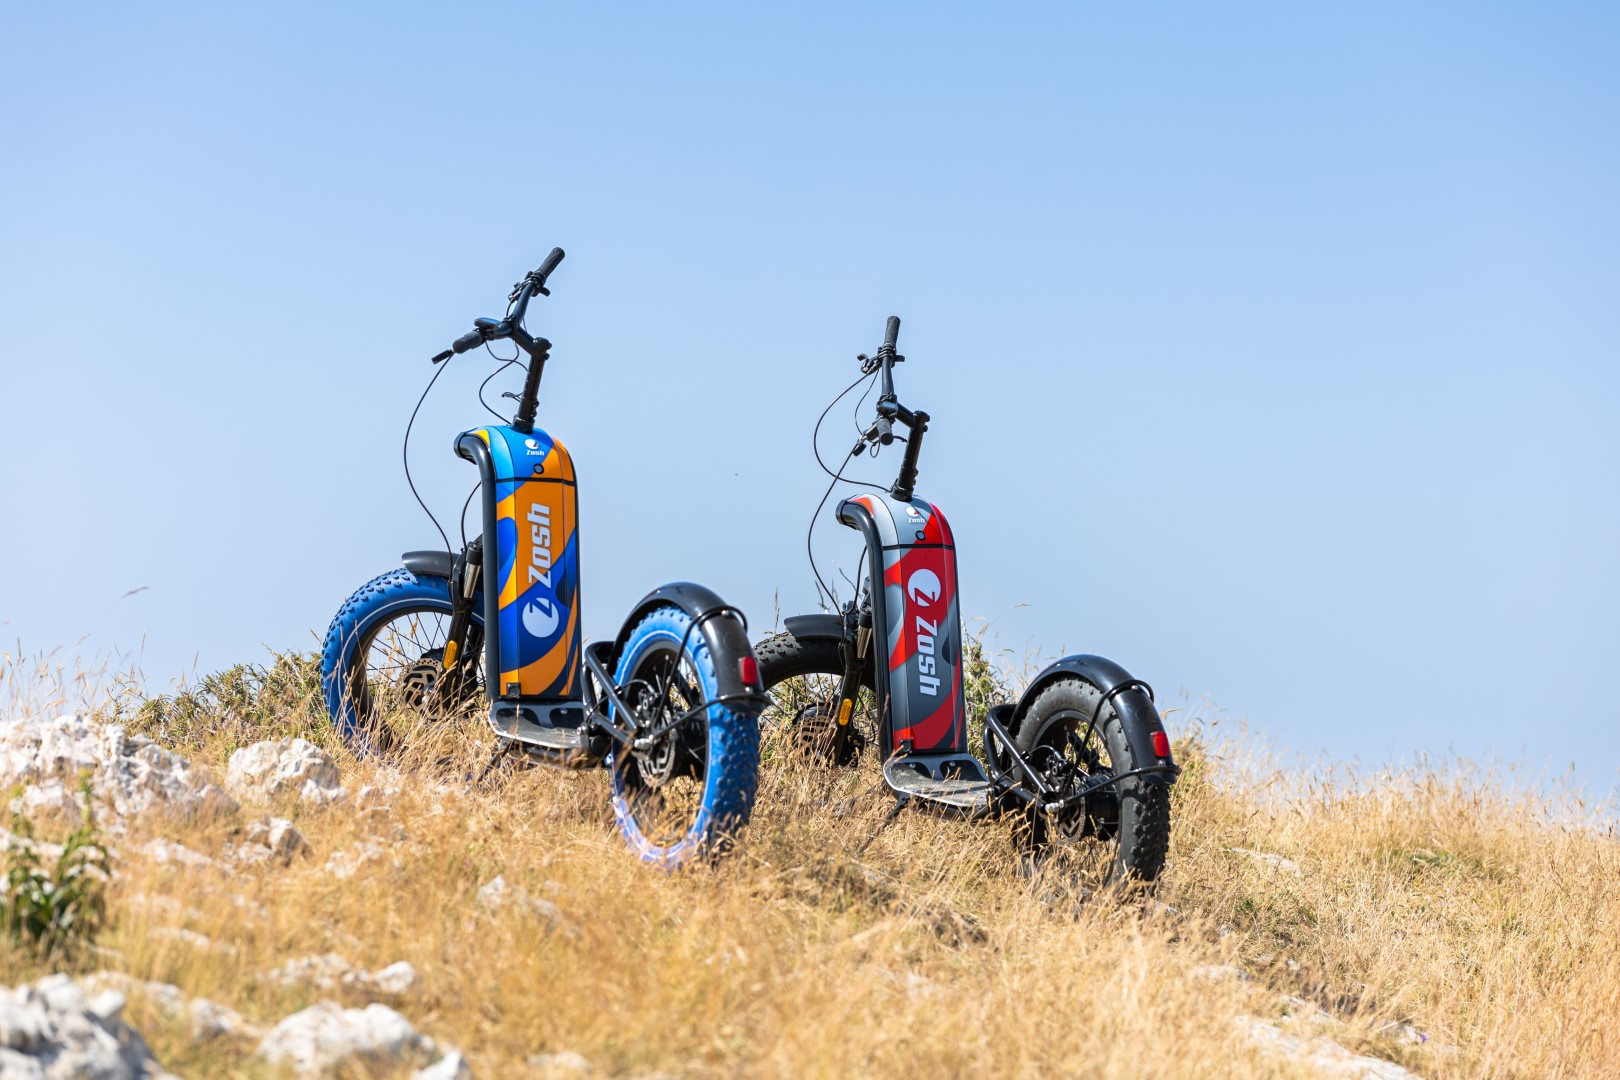 Zosh, the electric scooter for adults made in France